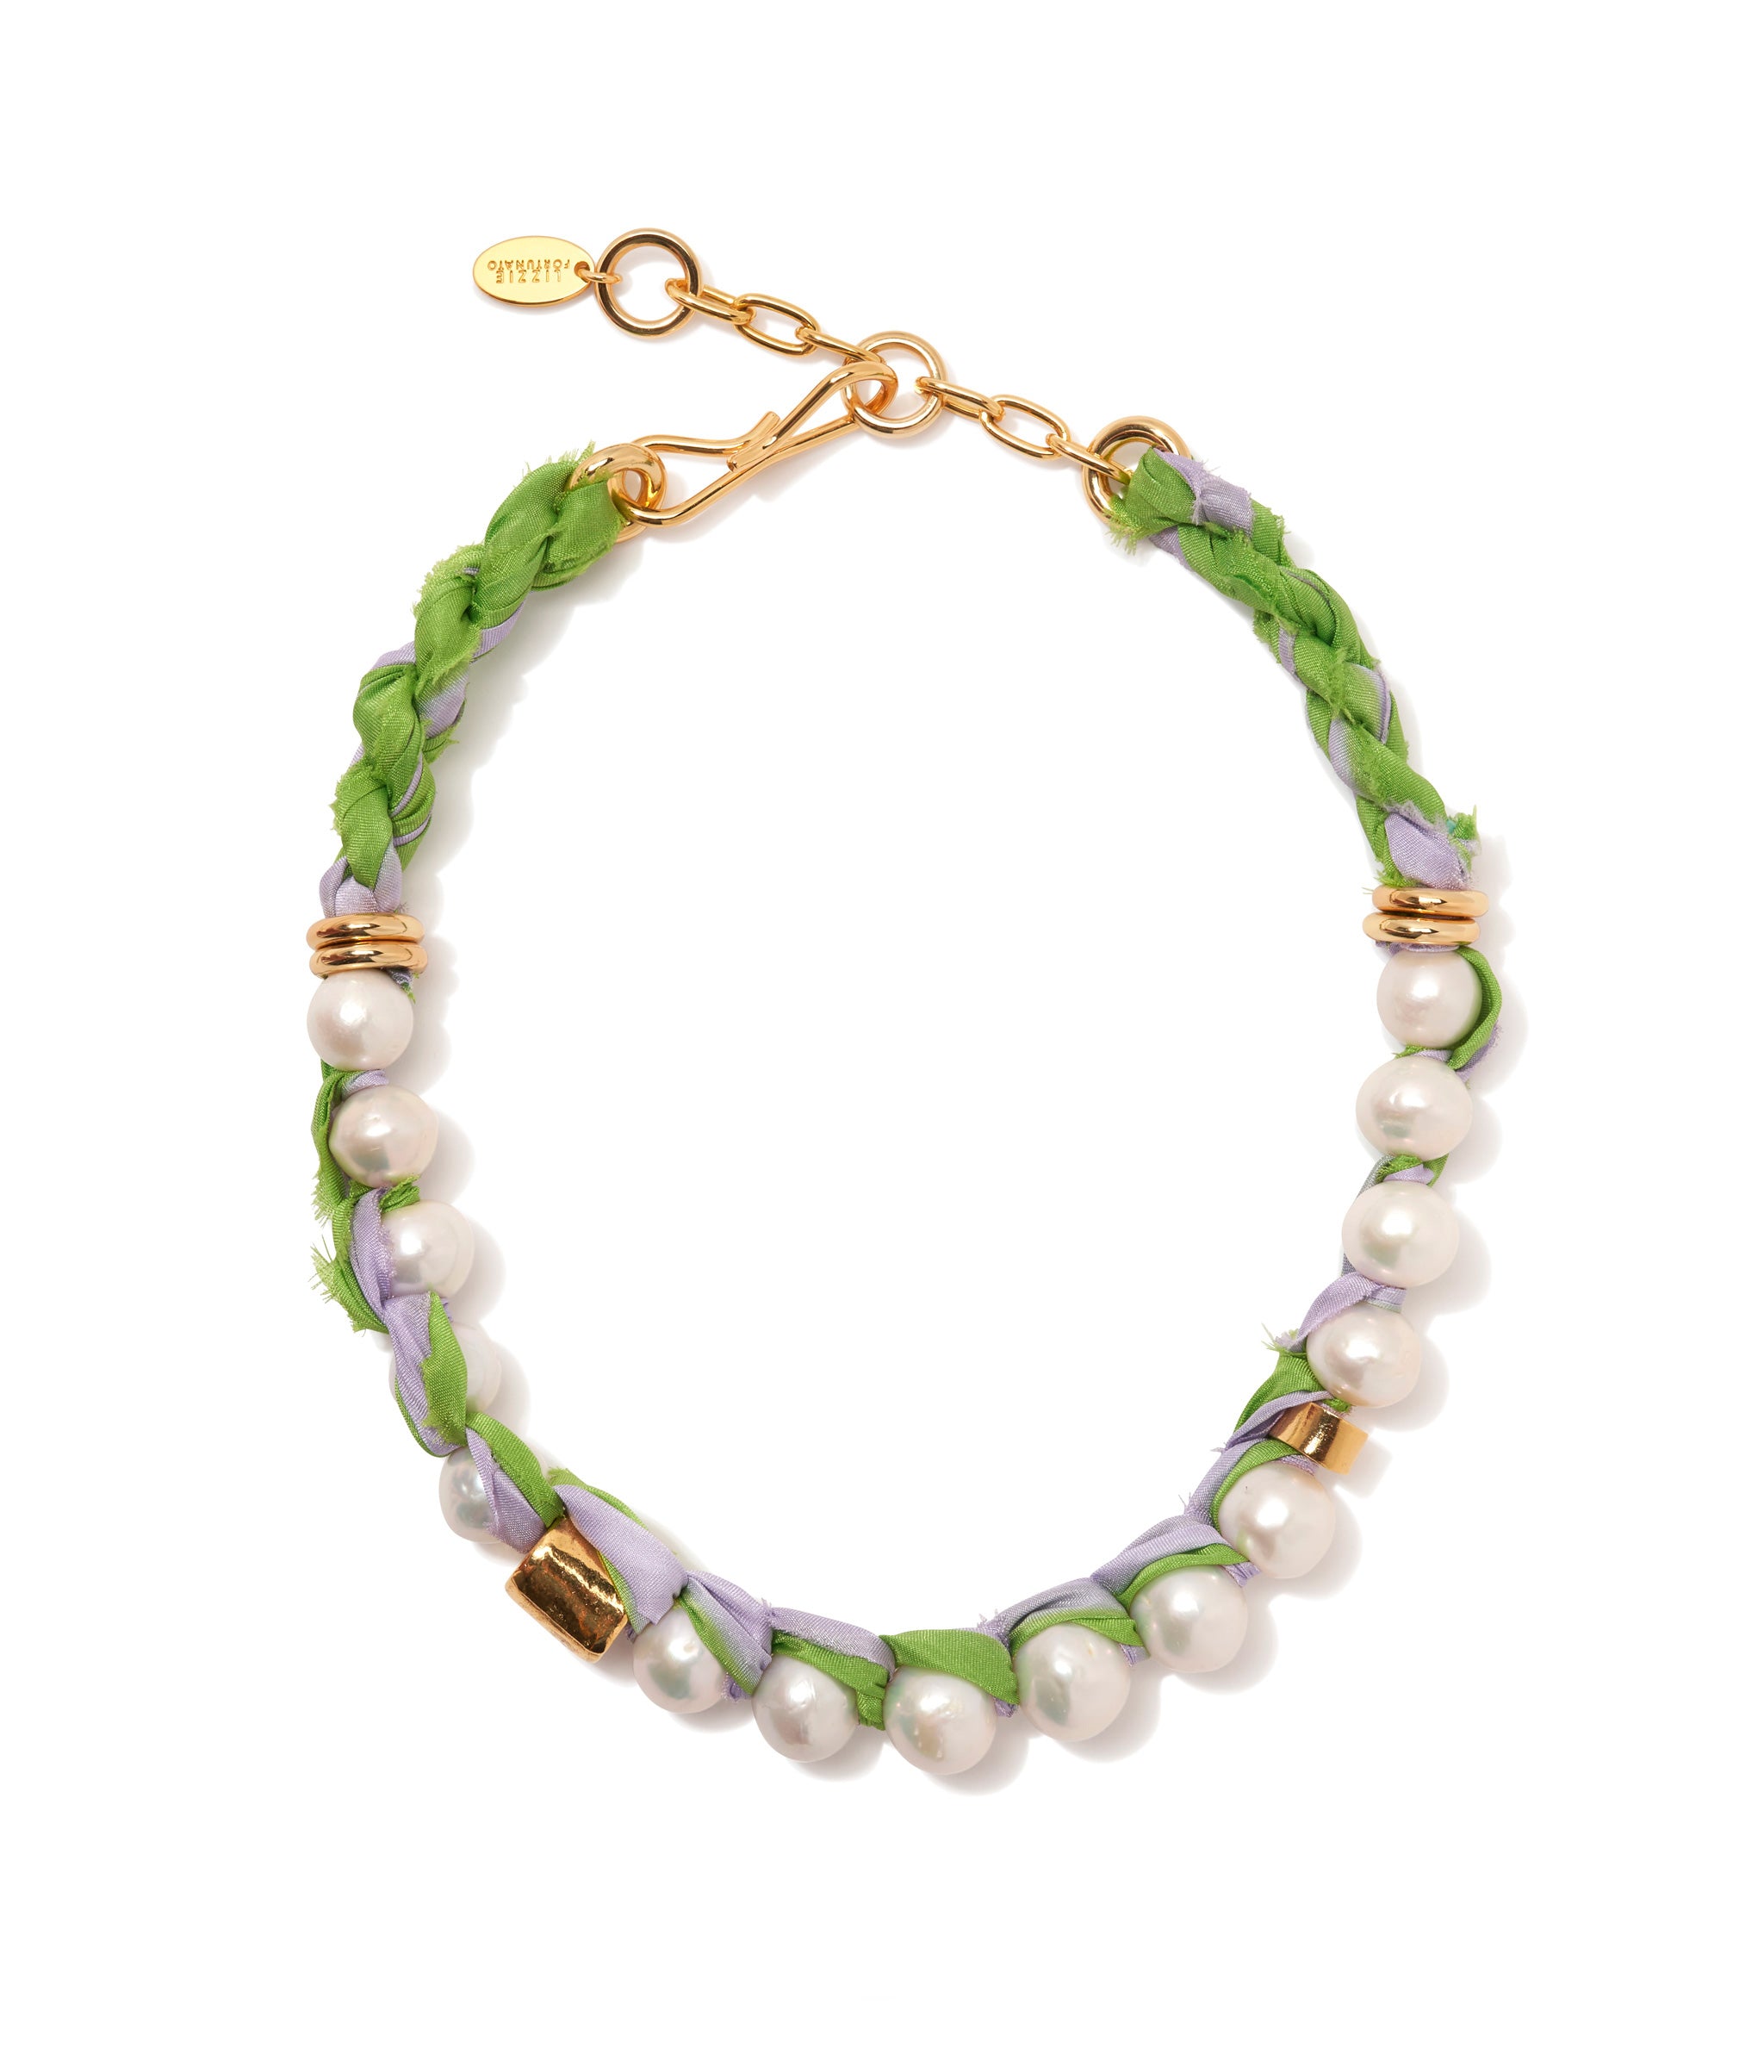 Daybreak Collar in Lavender and Lime